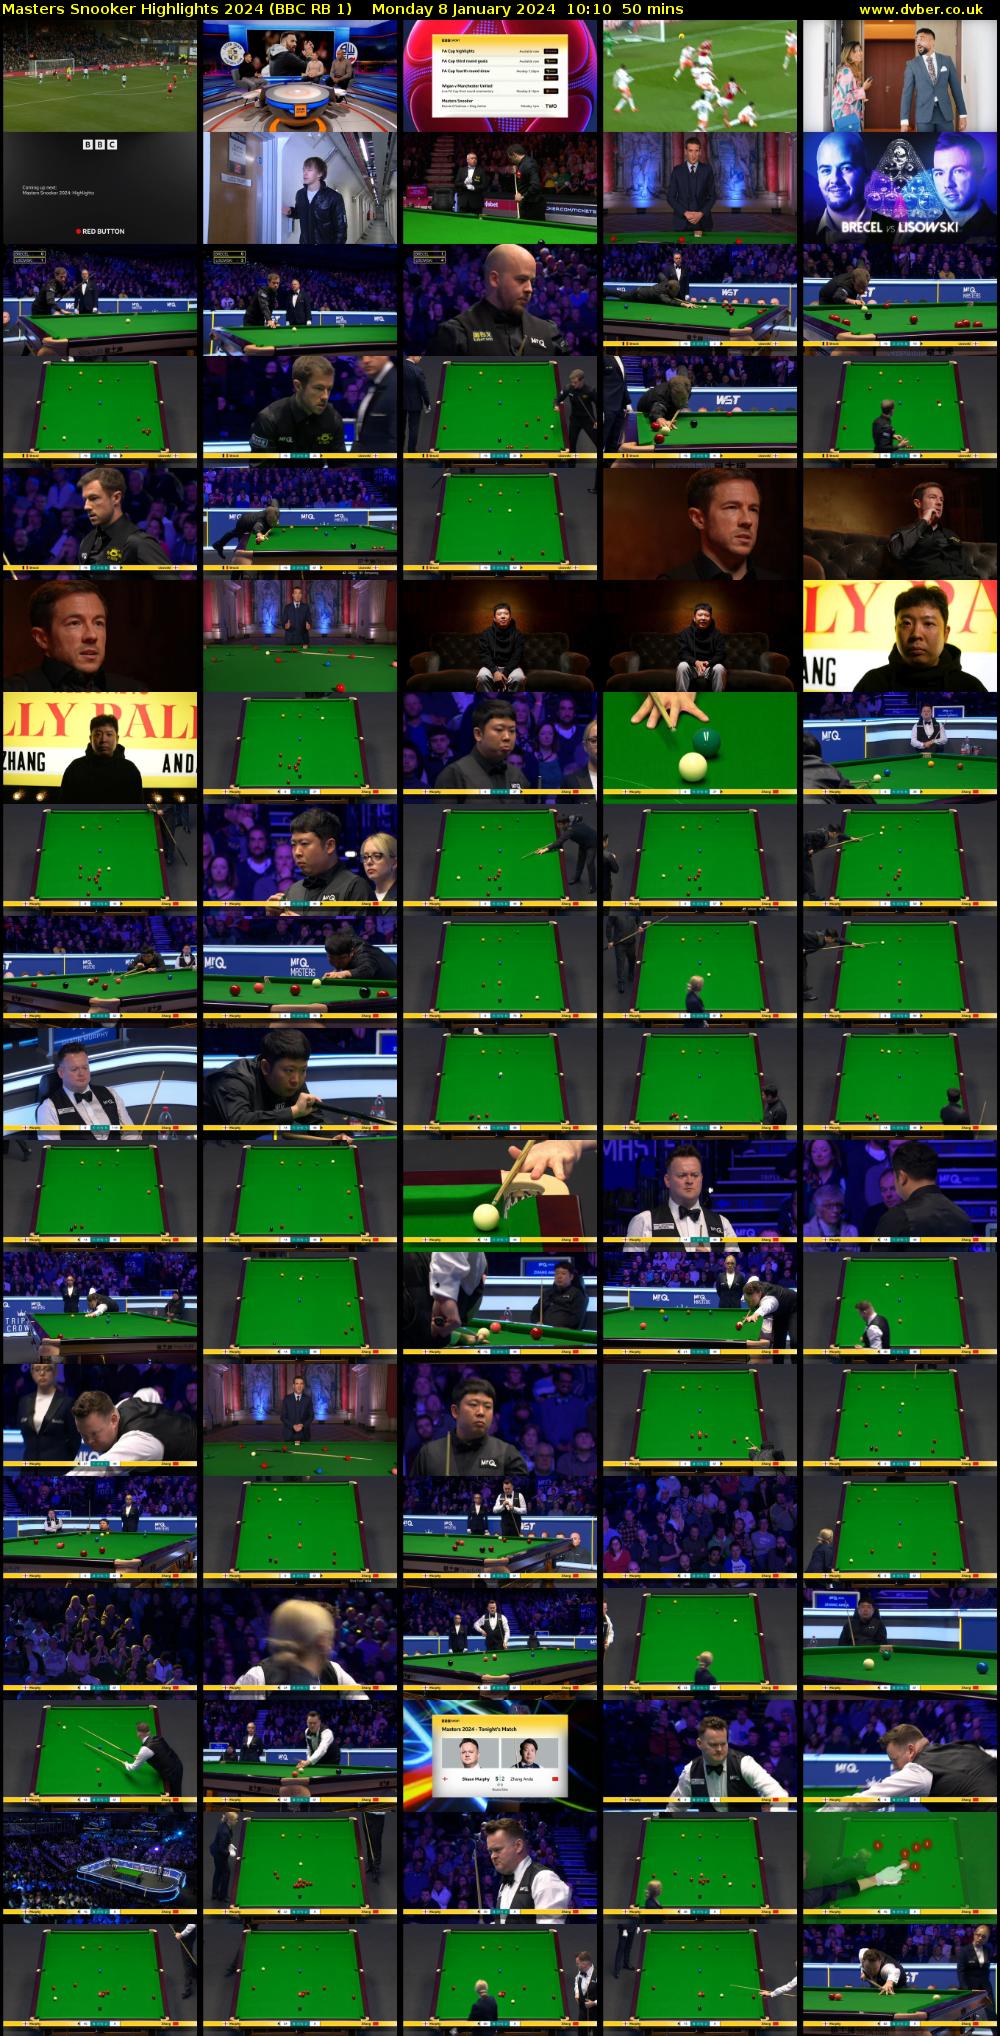 Masters Snooker Highlights 2024 (BBC RB 1) Monday 8 January 2024 10:10 - 11:00